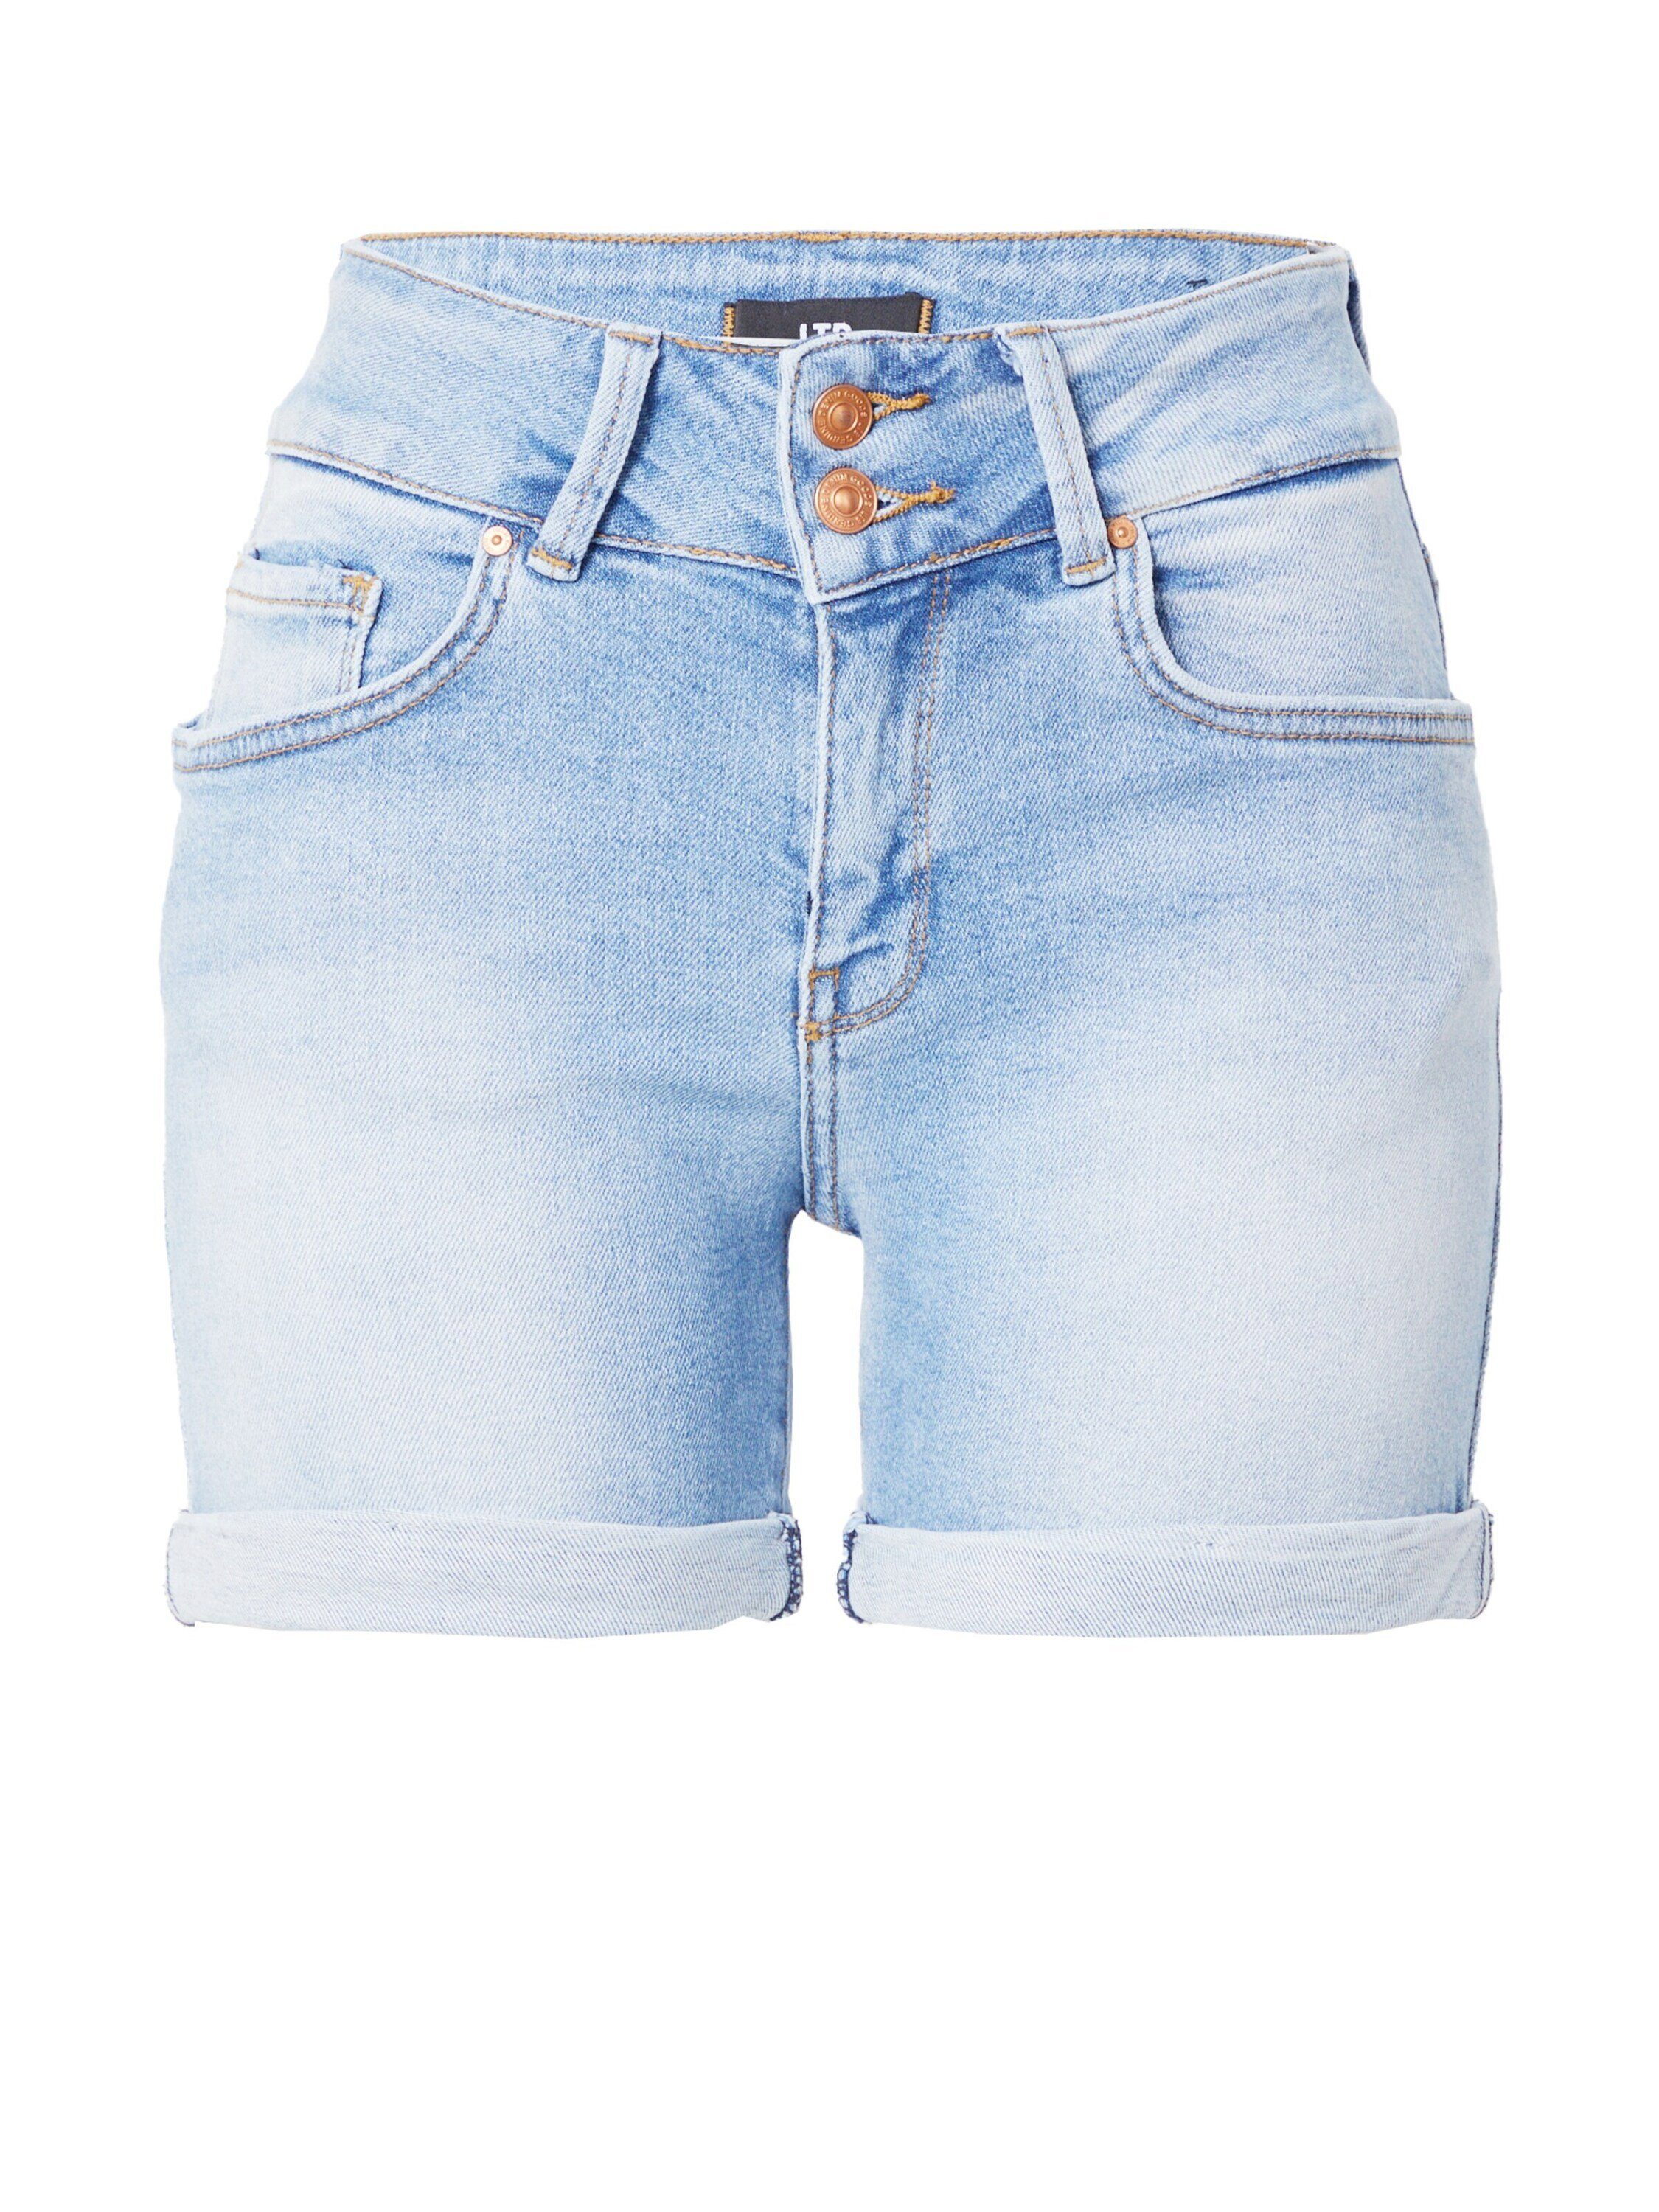 LTB Jeansshorts Becky Detail Details, Weiteres (1-tlg) Plain/ohne